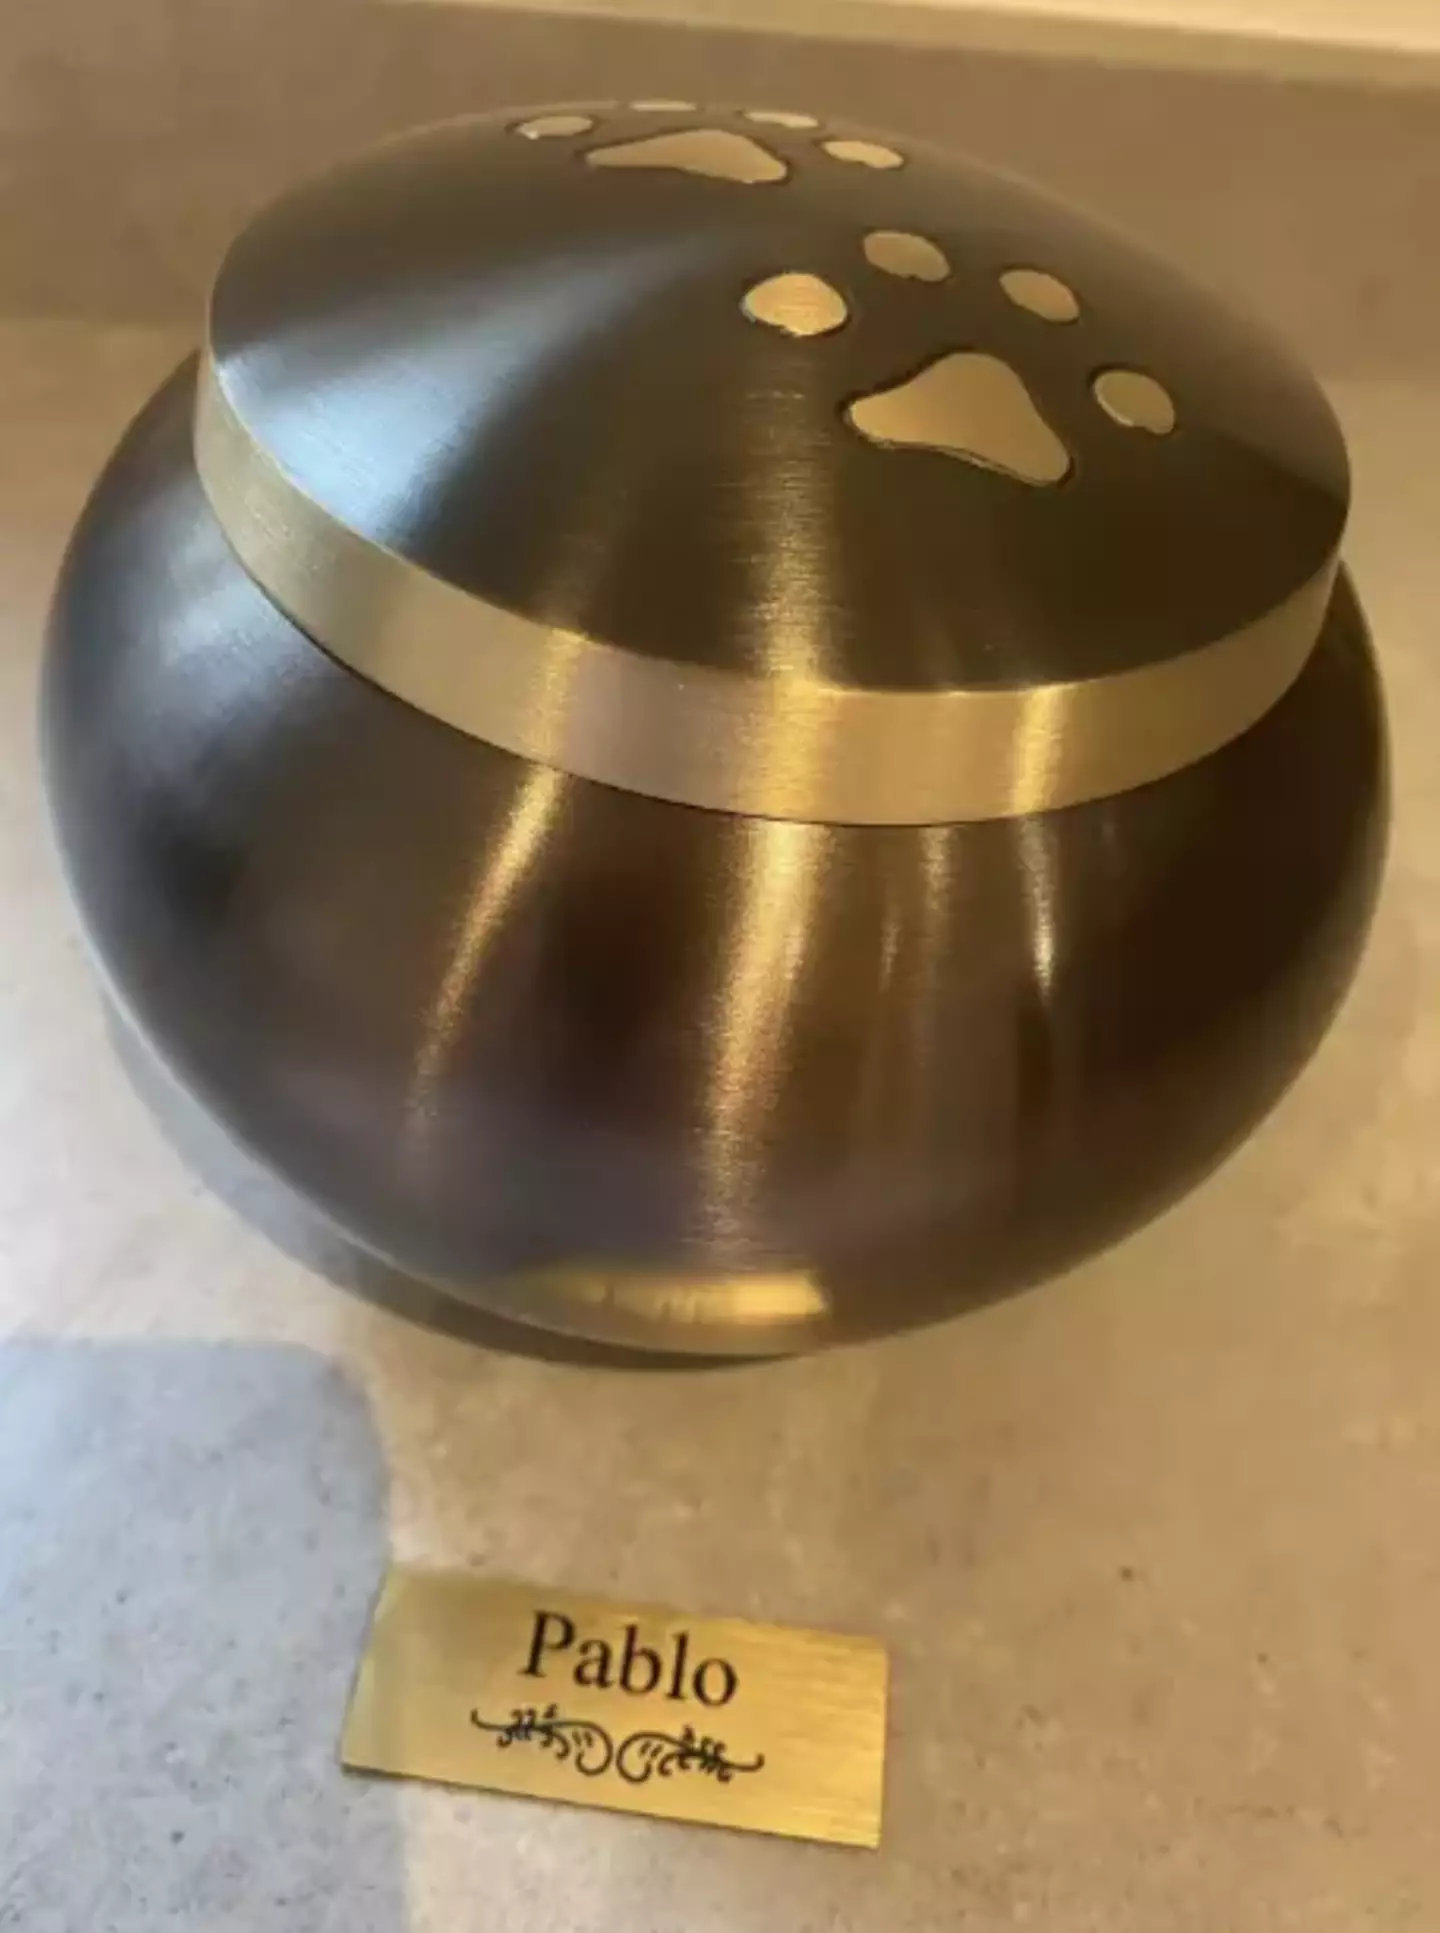 The family picked up Pablo's ashes upon their return from the trip.